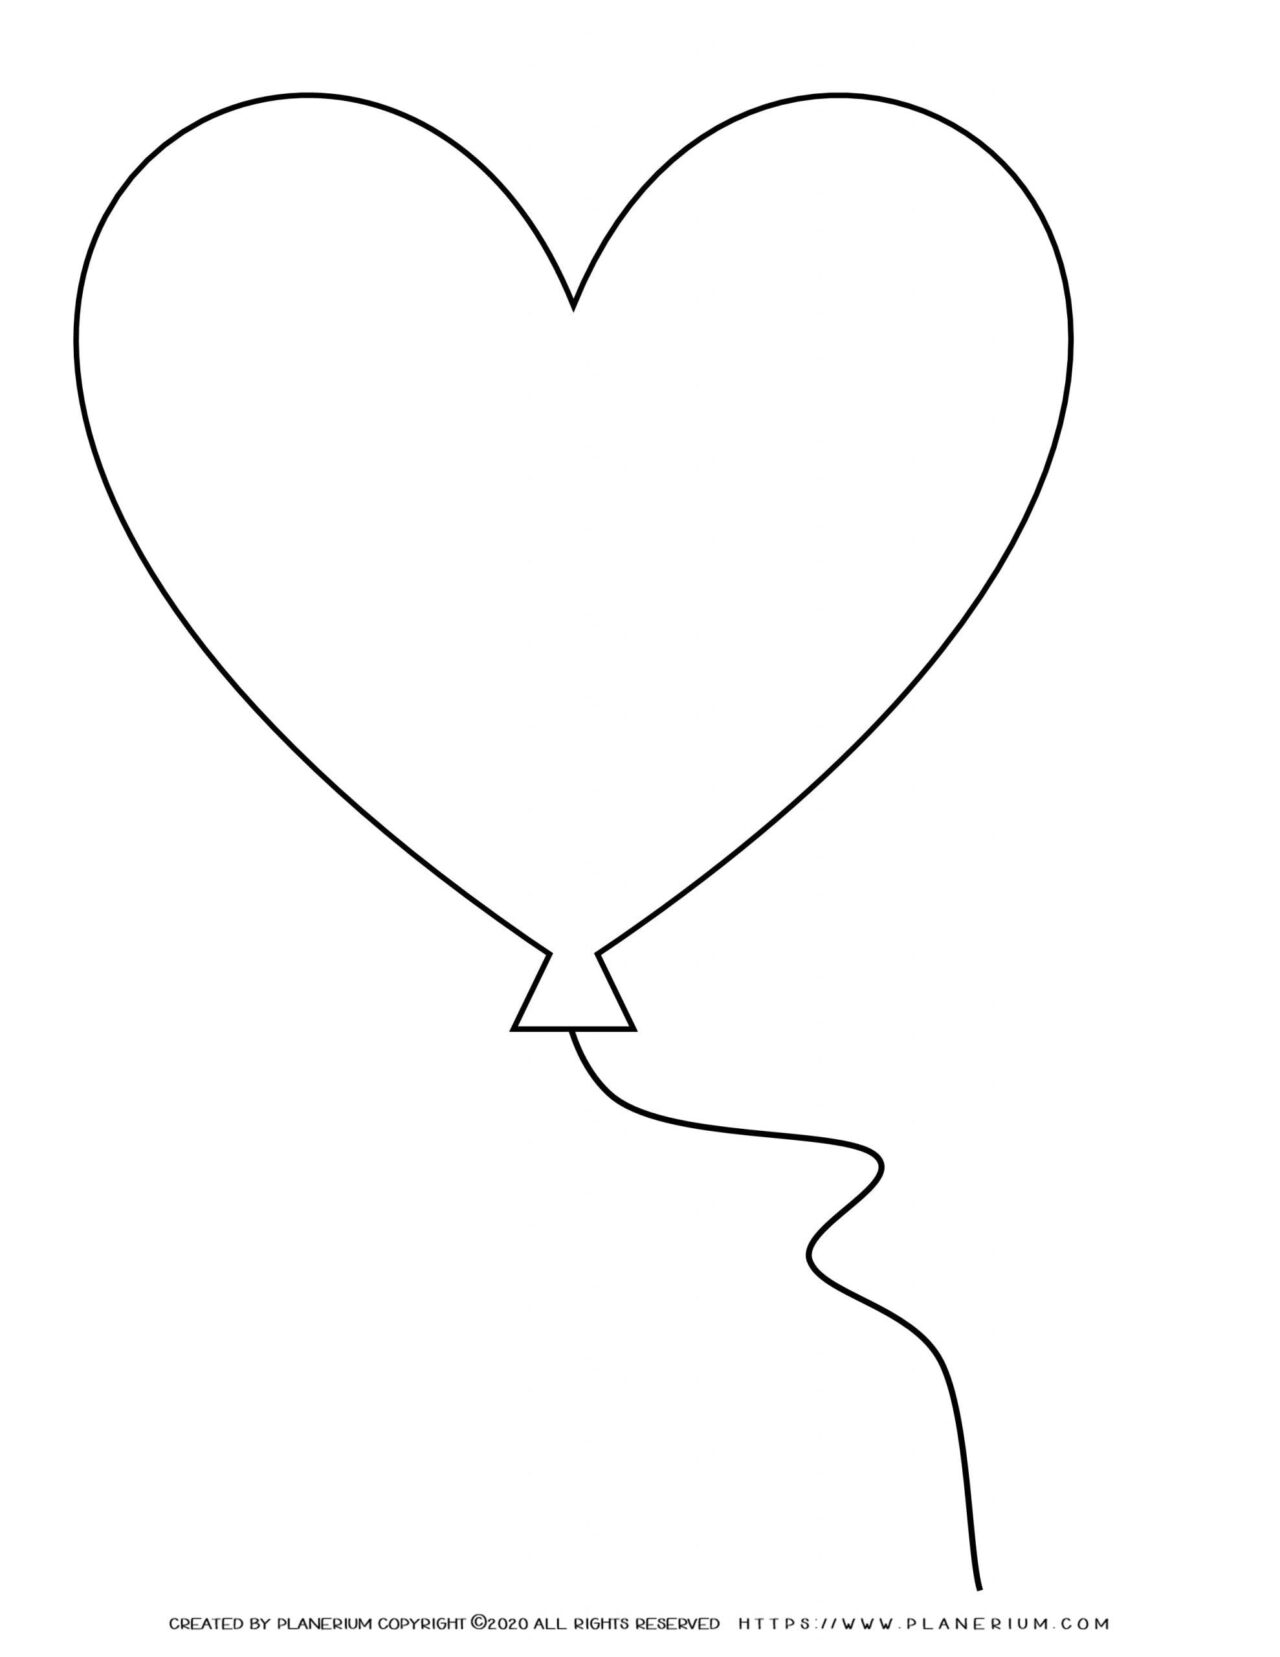 Mother's Day Coloring Page - Heart Balloon Template